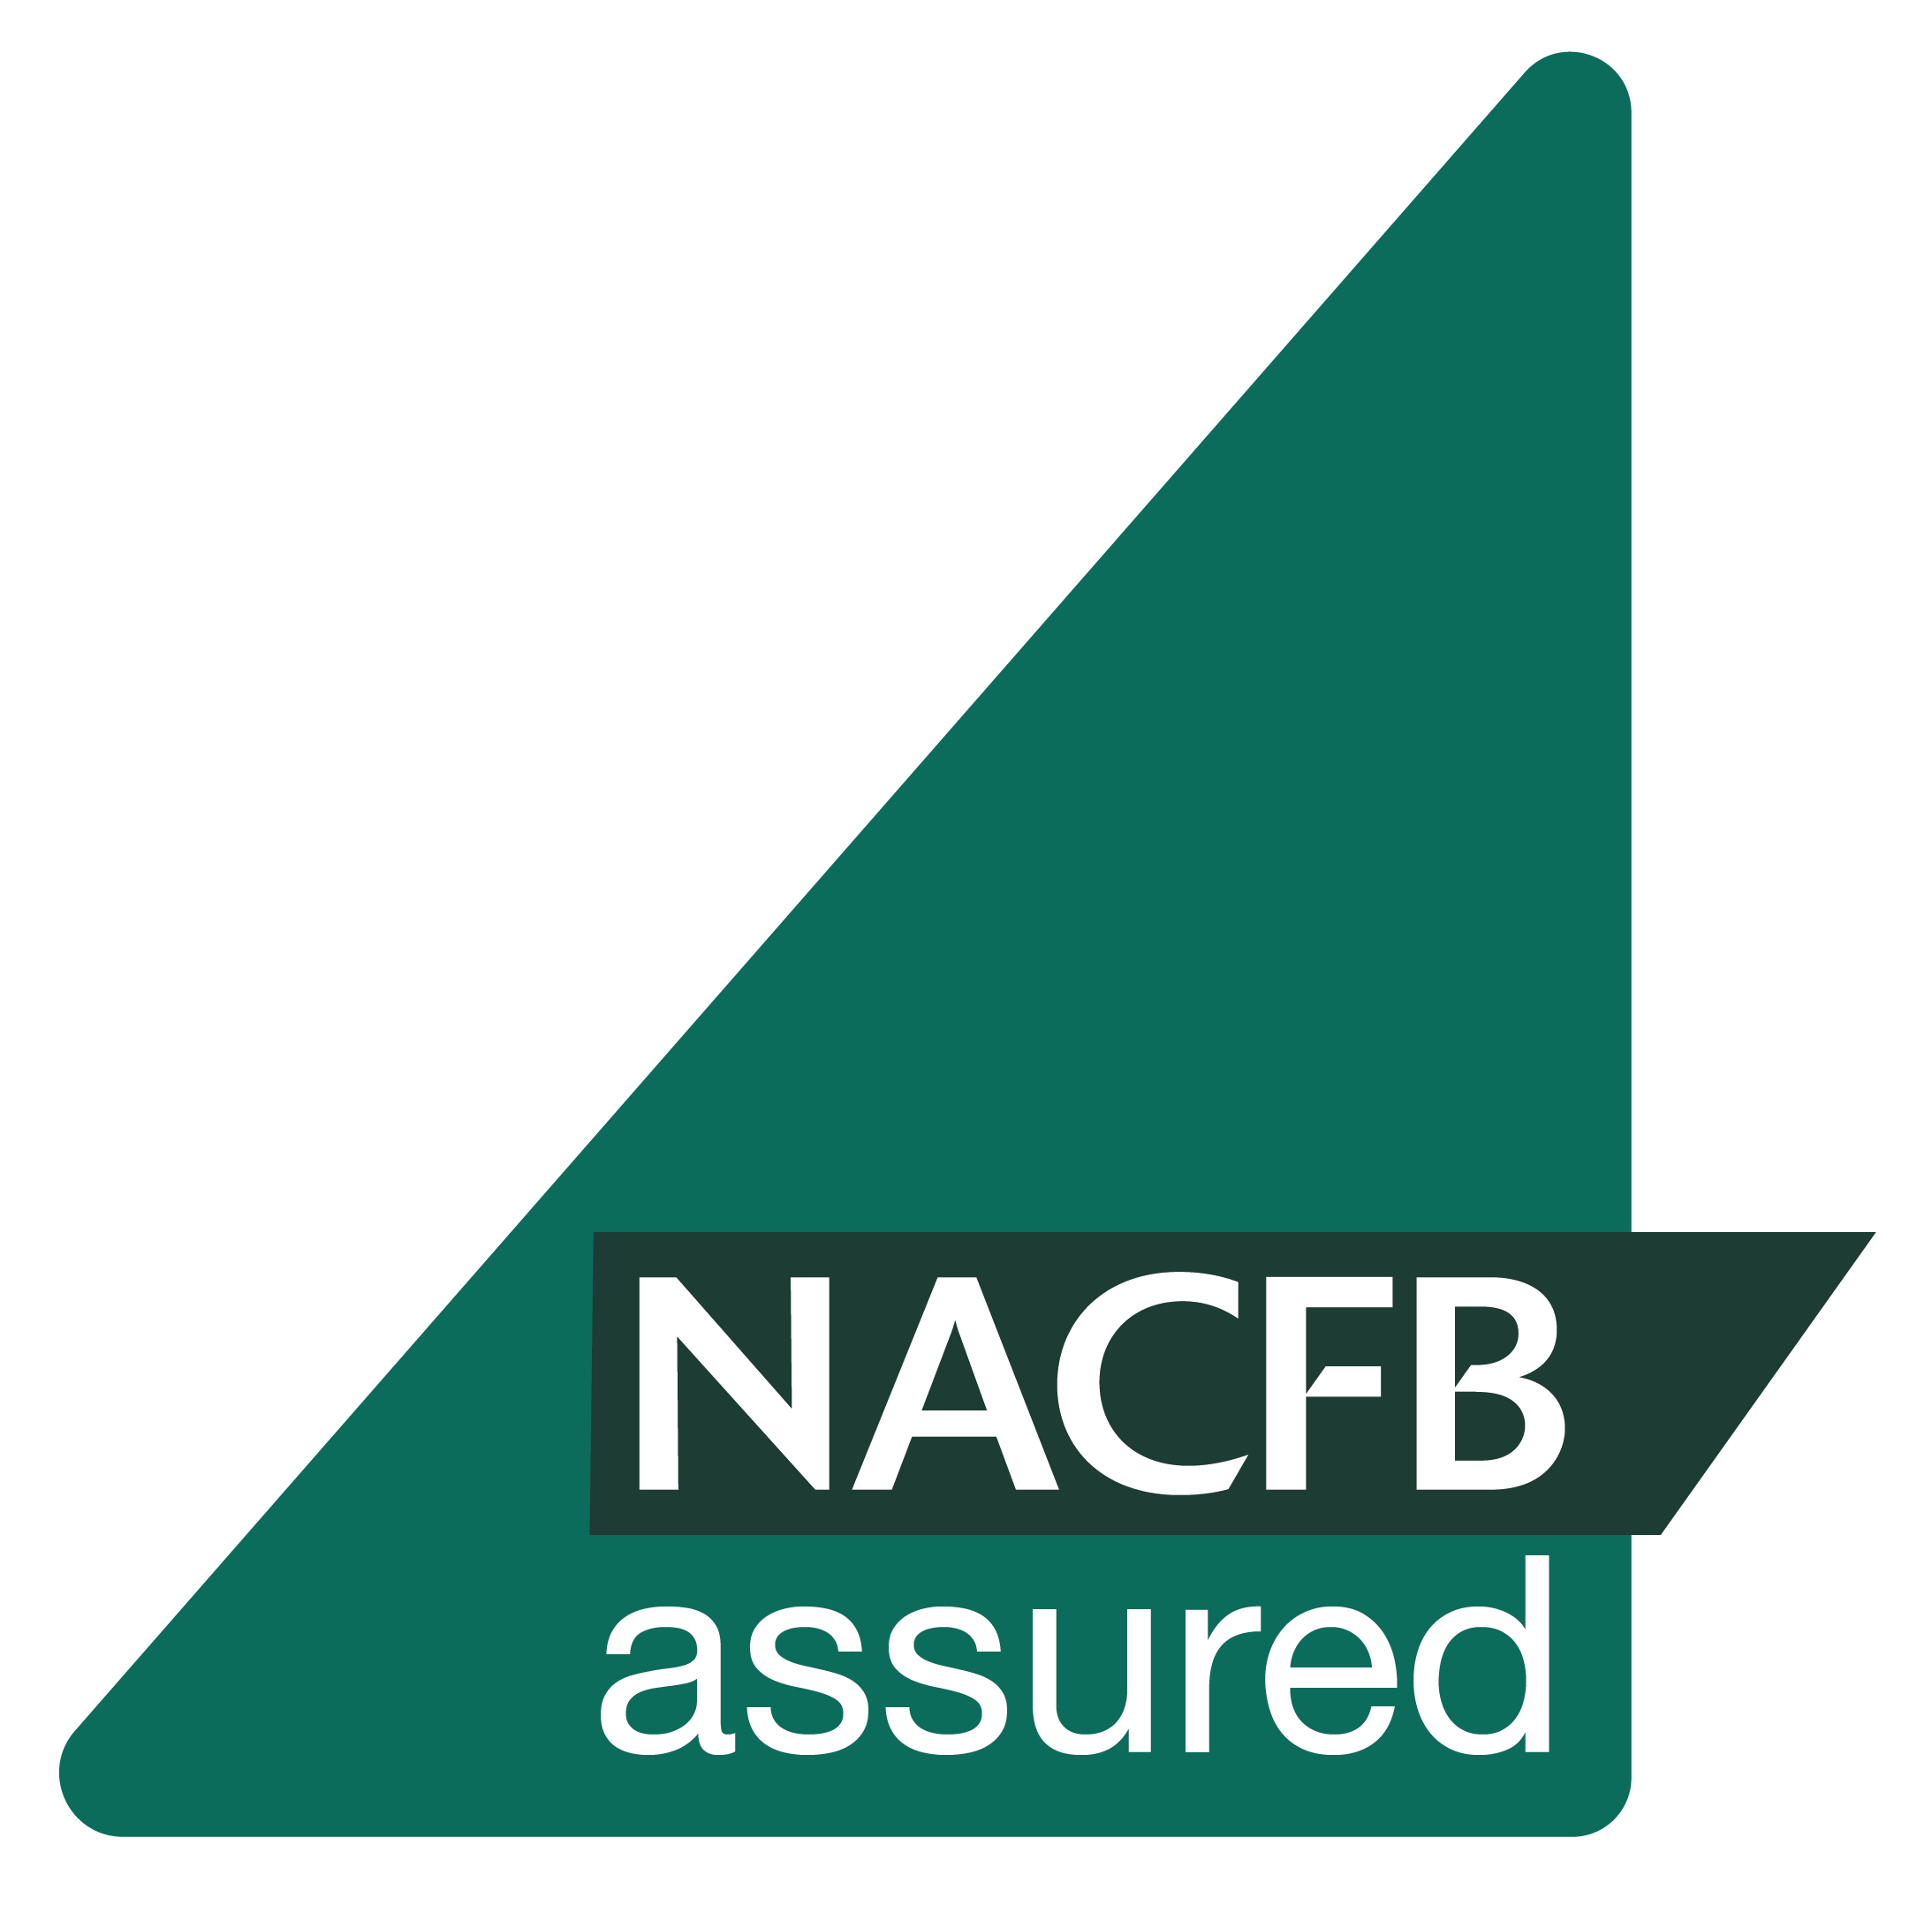 LFL is an assured Member of the National Association of Commercial Finance Brokers (NACFB)  